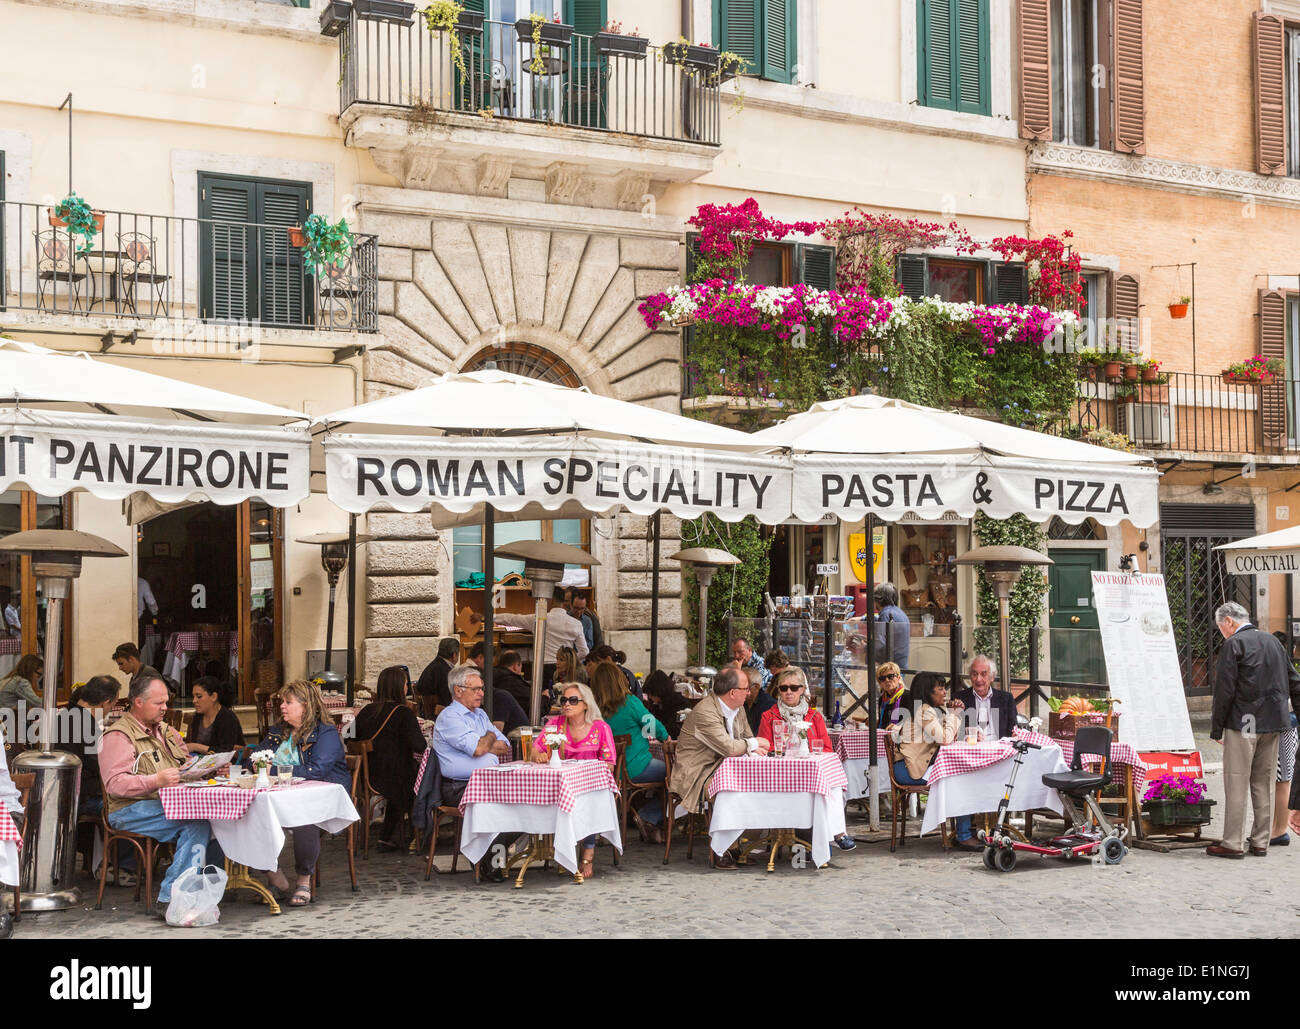 Piazza Novona, Rome, Italy: tourists enjoying a lunch and snacks at a pavement cafe/restaurant Stock Photo